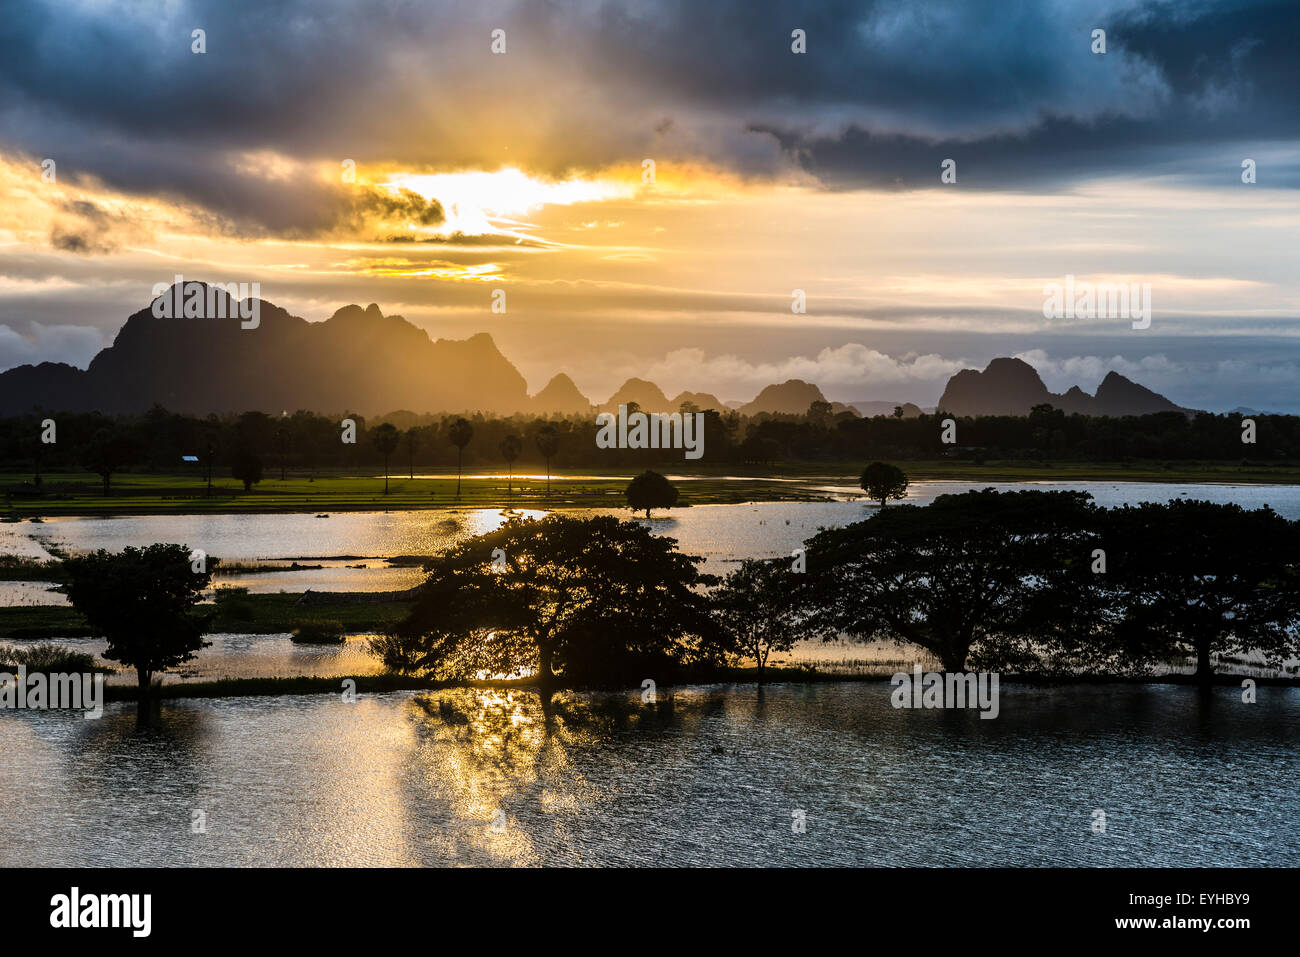 Sunset above tower karst mountains, artificial lake, landscape in the evening light, Hpa-an, Karen or Kayin State, Myanmar Stock Photo